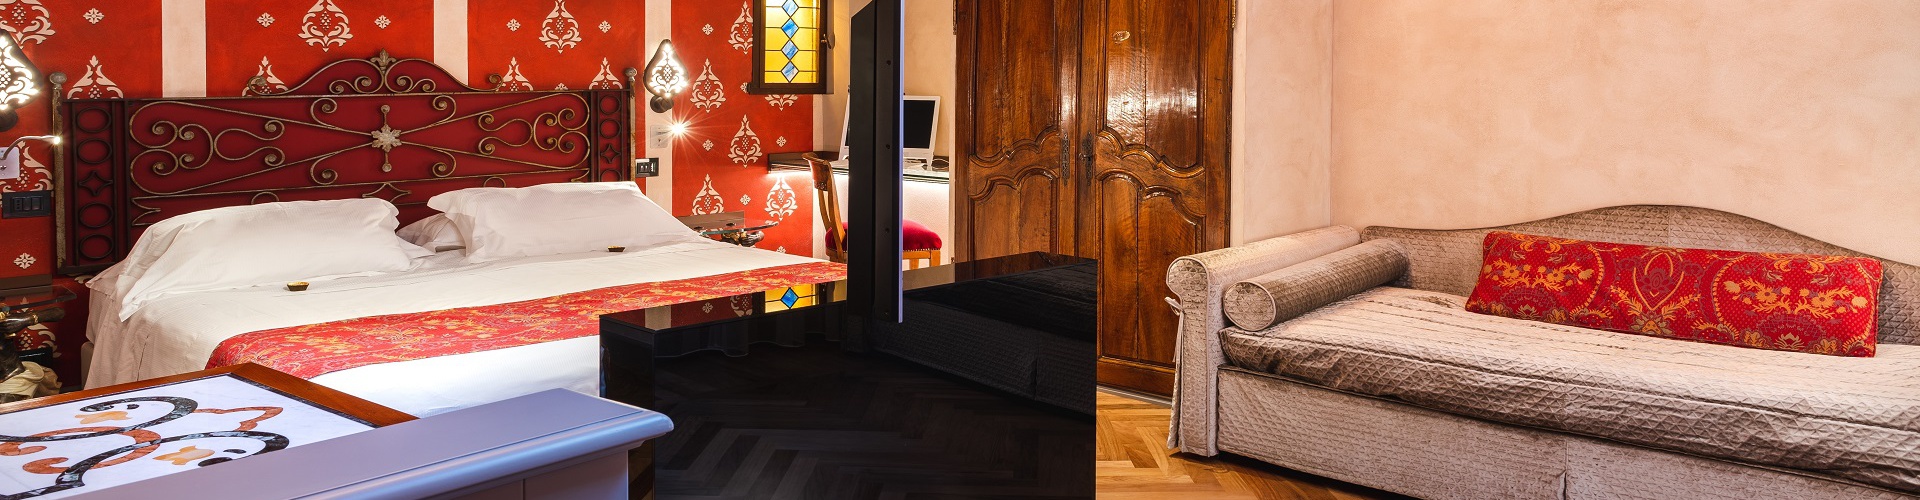 Commercianti Hotel rediseño - Bologna - HOLIDAYS WITH YOUR FURRY COMPANIONS